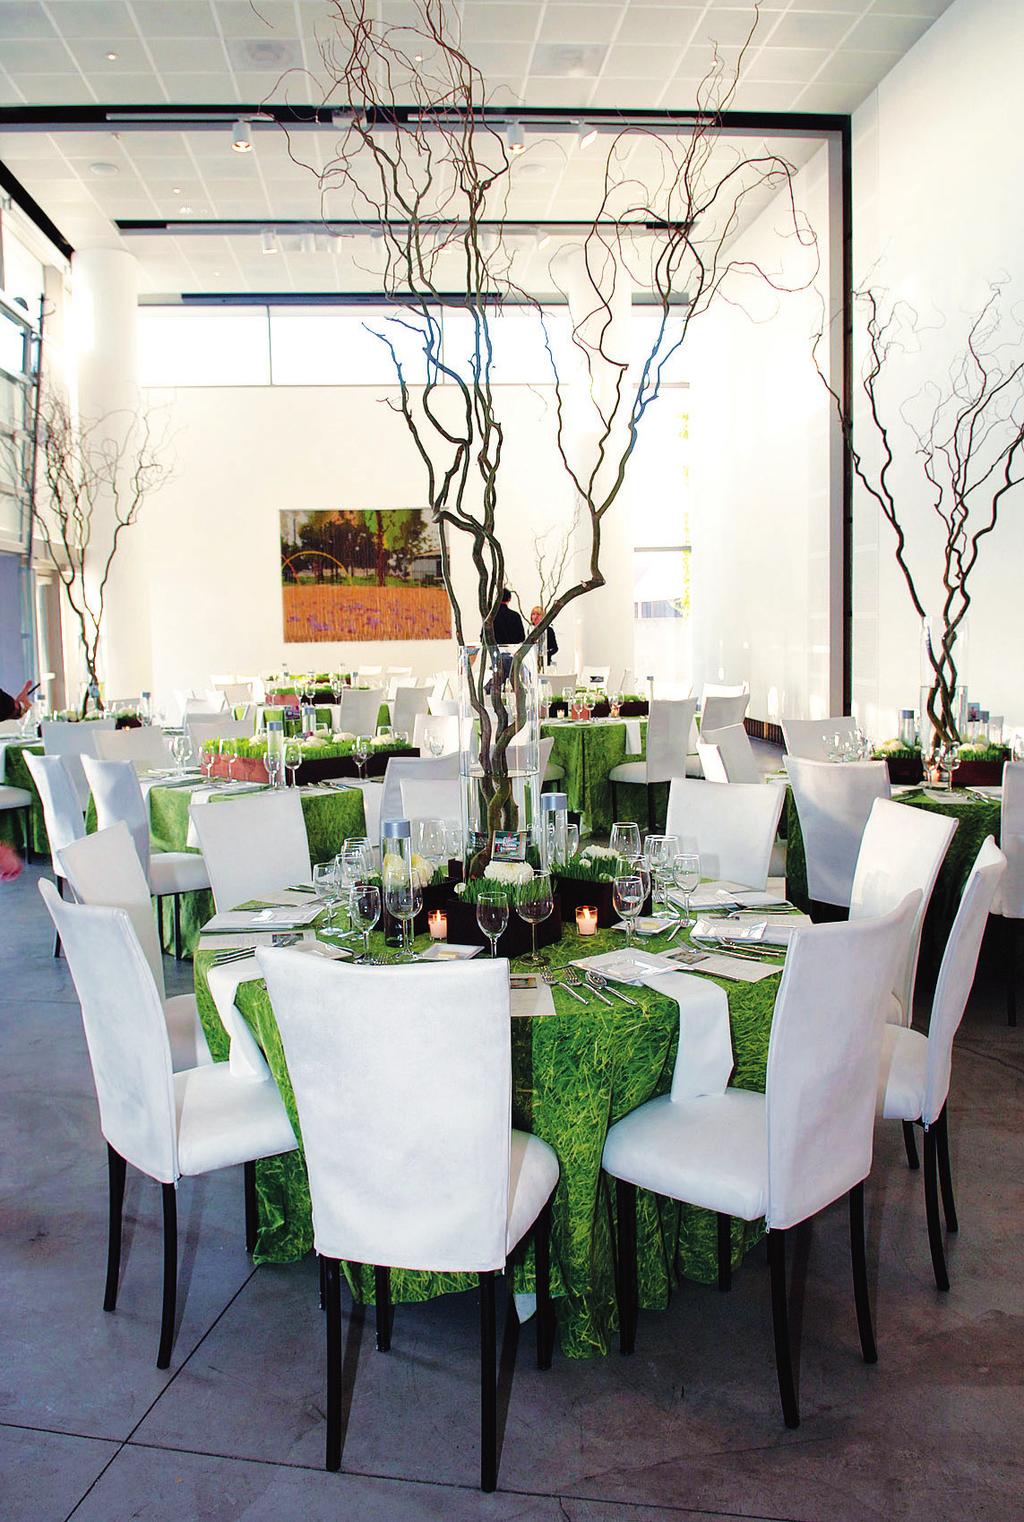 WEDDINGS AND SPECIAL EVENTS The Orange County Museum of Art provides a blank canvas